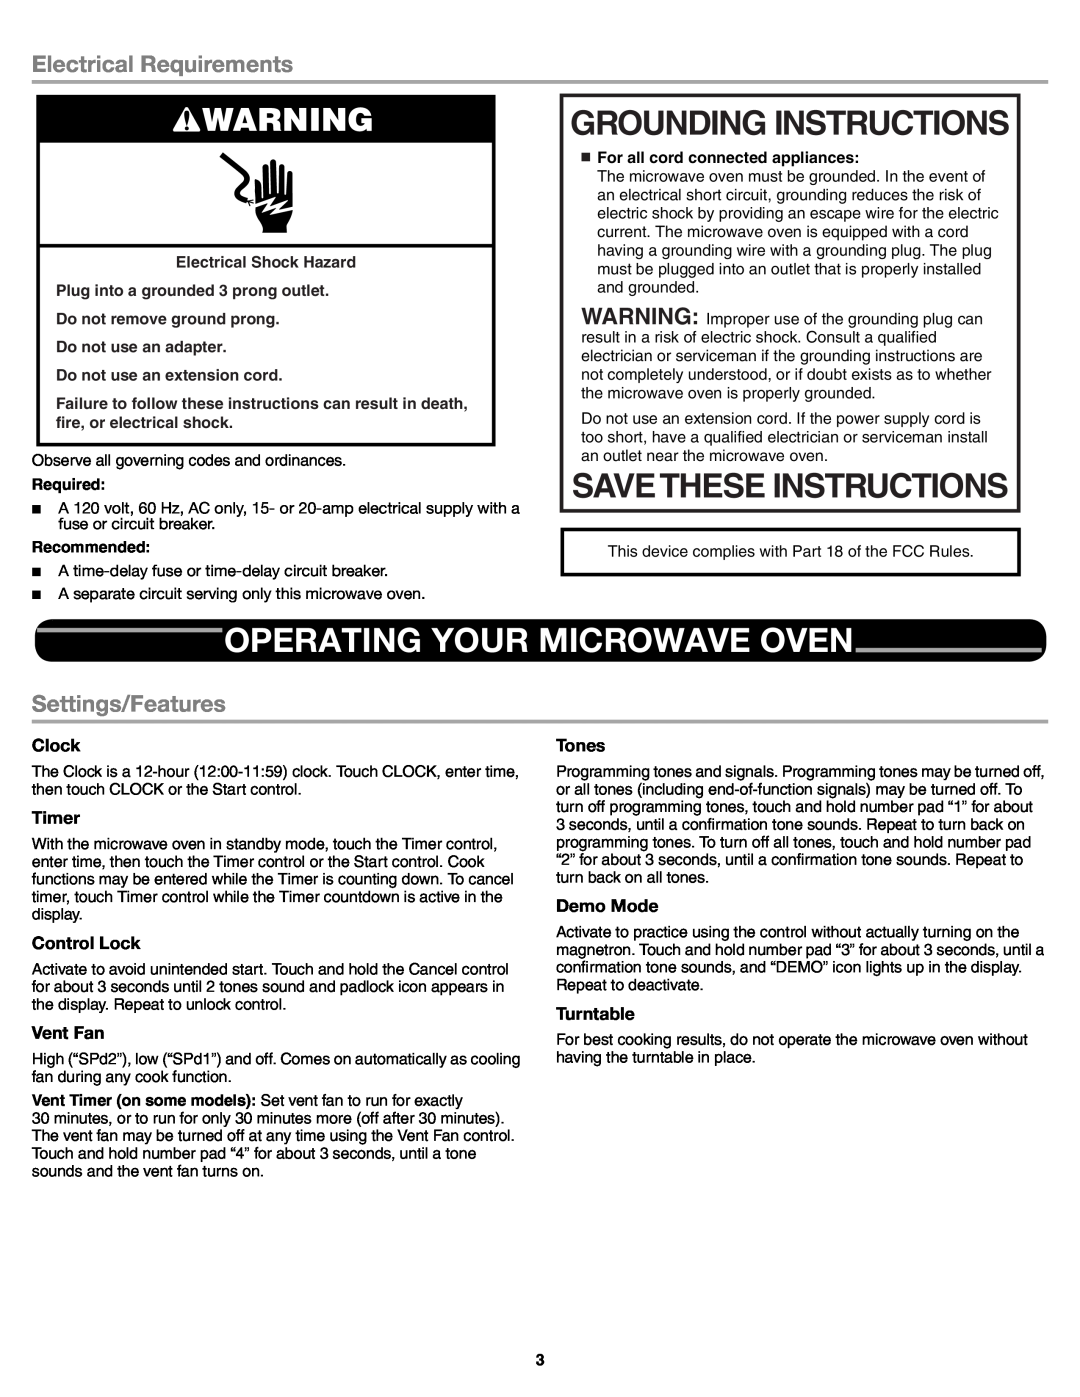 Whirlpool W10545083A Grounding Instructions, Operating Your Microwave Oven, Electrical Requirements, Settings/Features 